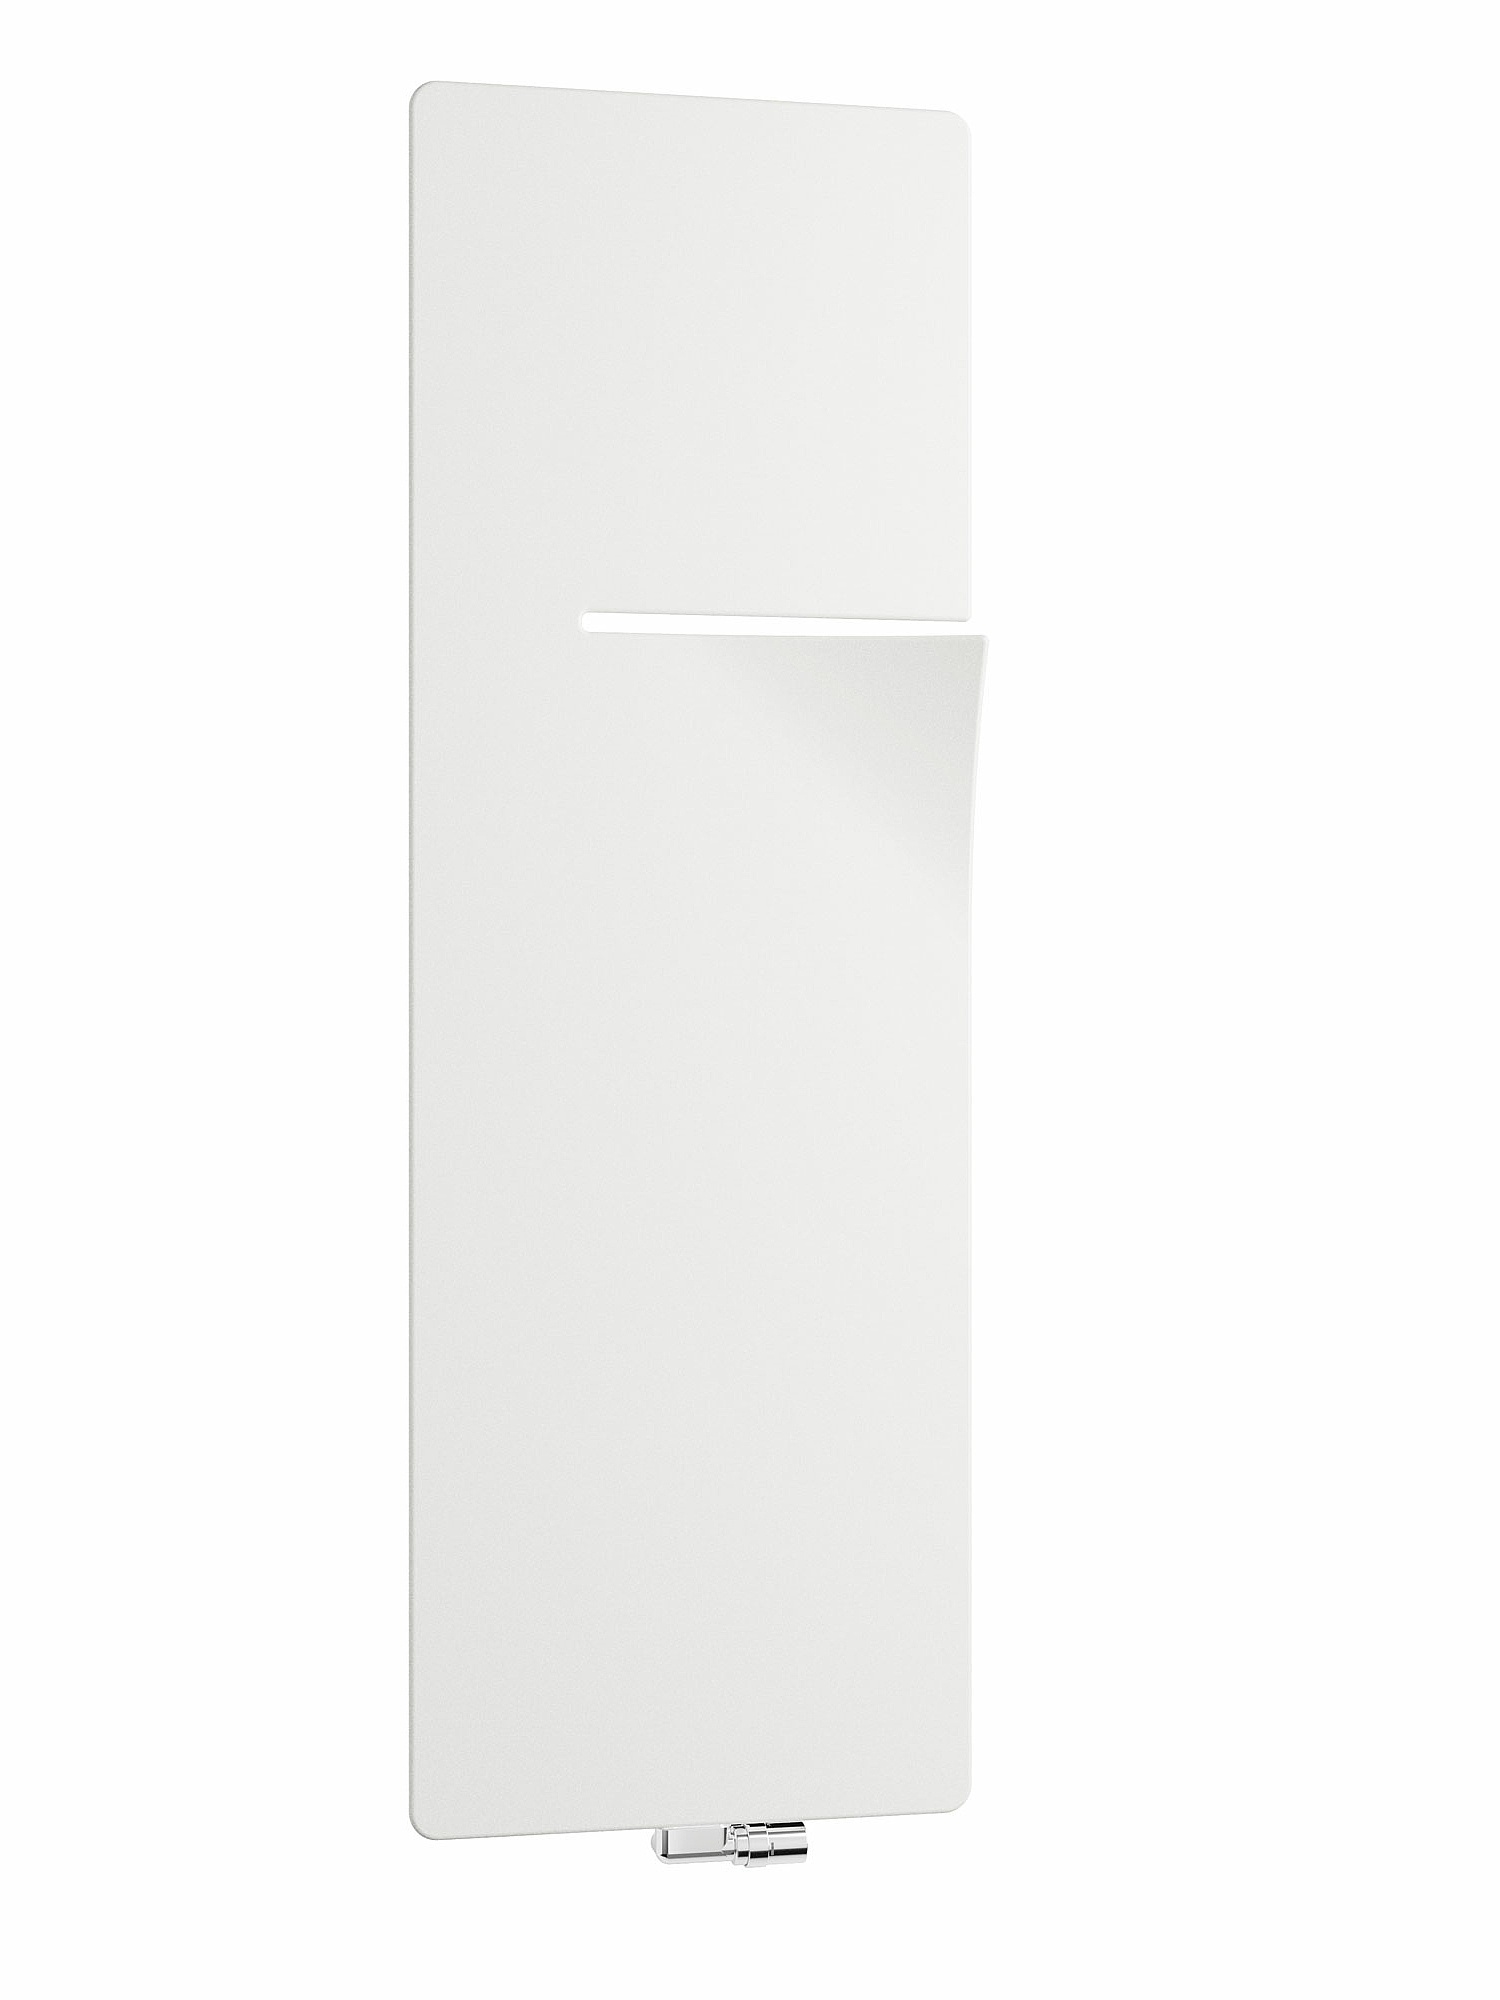 Bathroom and home radiator Ineo in the left-hand version, colour Textured White